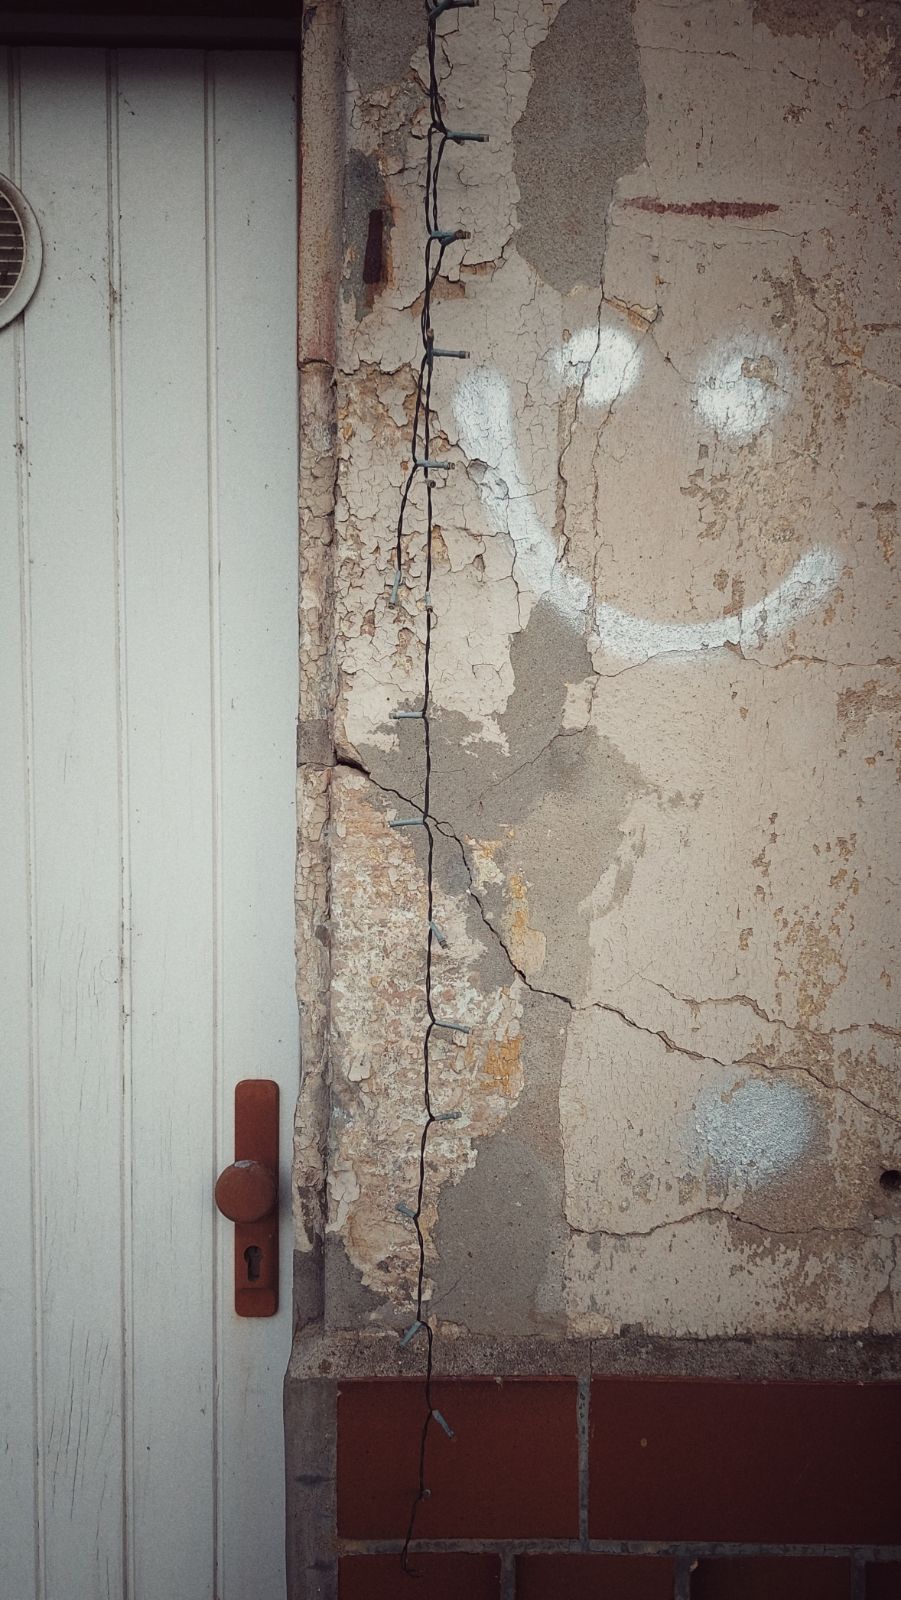 Wall of an abandoned house. A white door on the left, a crumbling wall on the right. A white face sprayed to the wall, and a chain of small lights hanging down in the middle. 